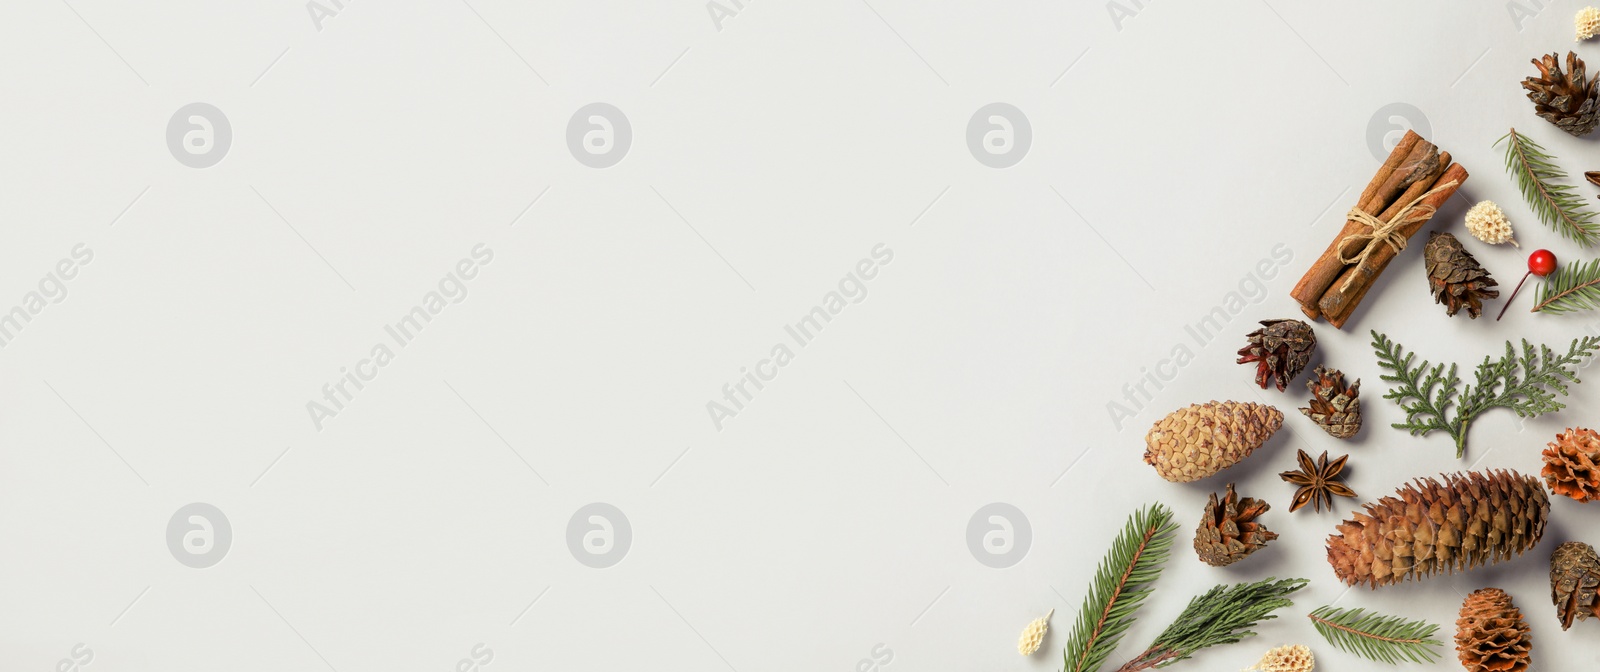 Image of Flat lay composition with pinecones on white background, space for text. Horizontal banner design